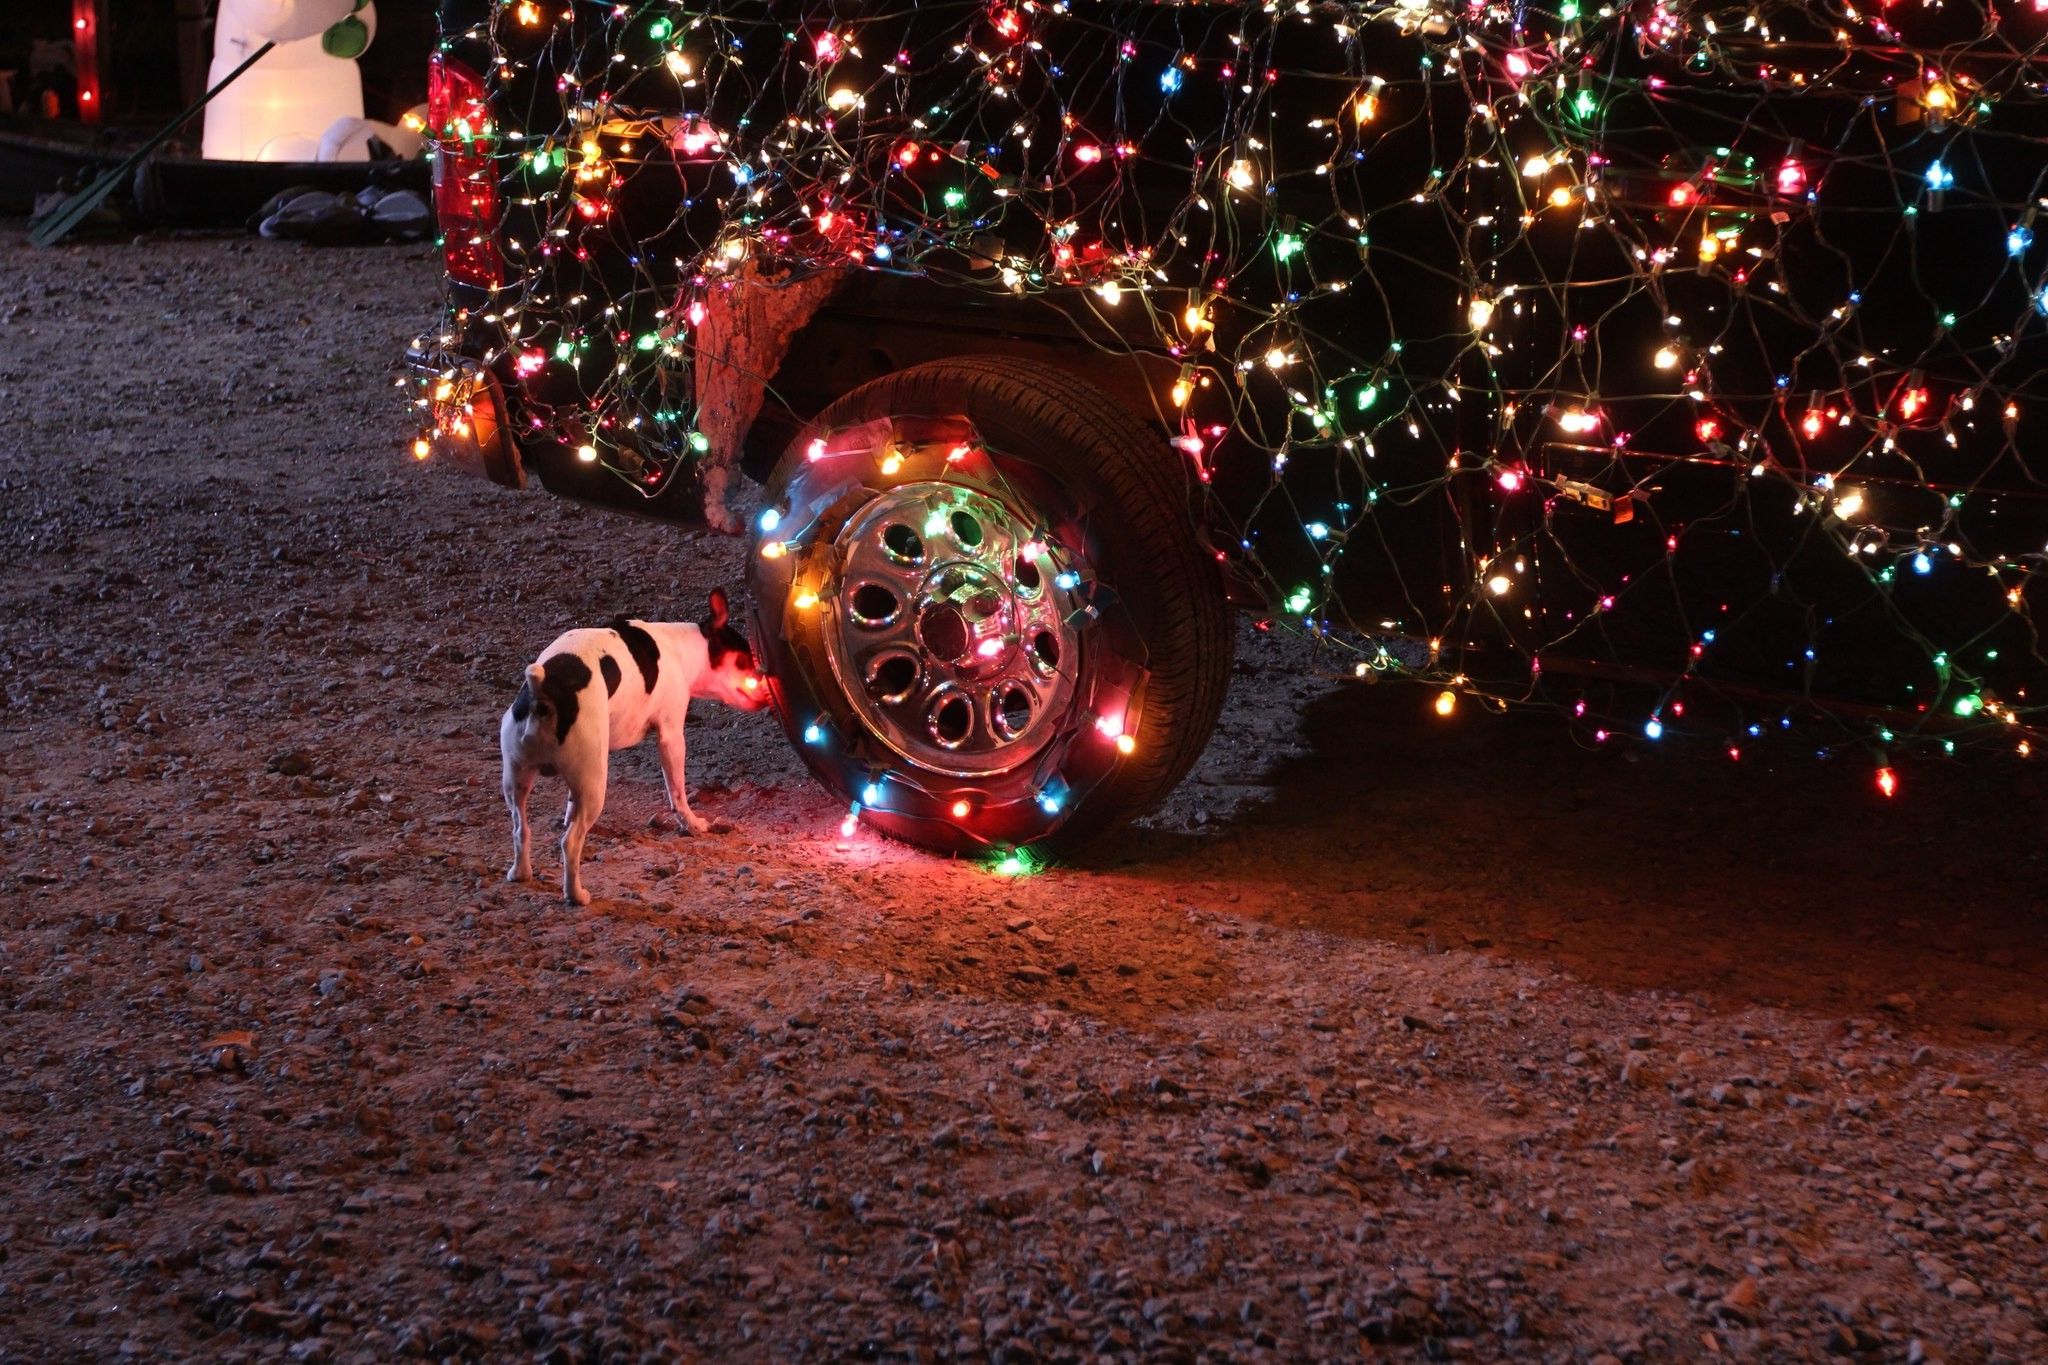 A dog sniffing a tire on a truck covered in Christmas lights. - Christmas lights